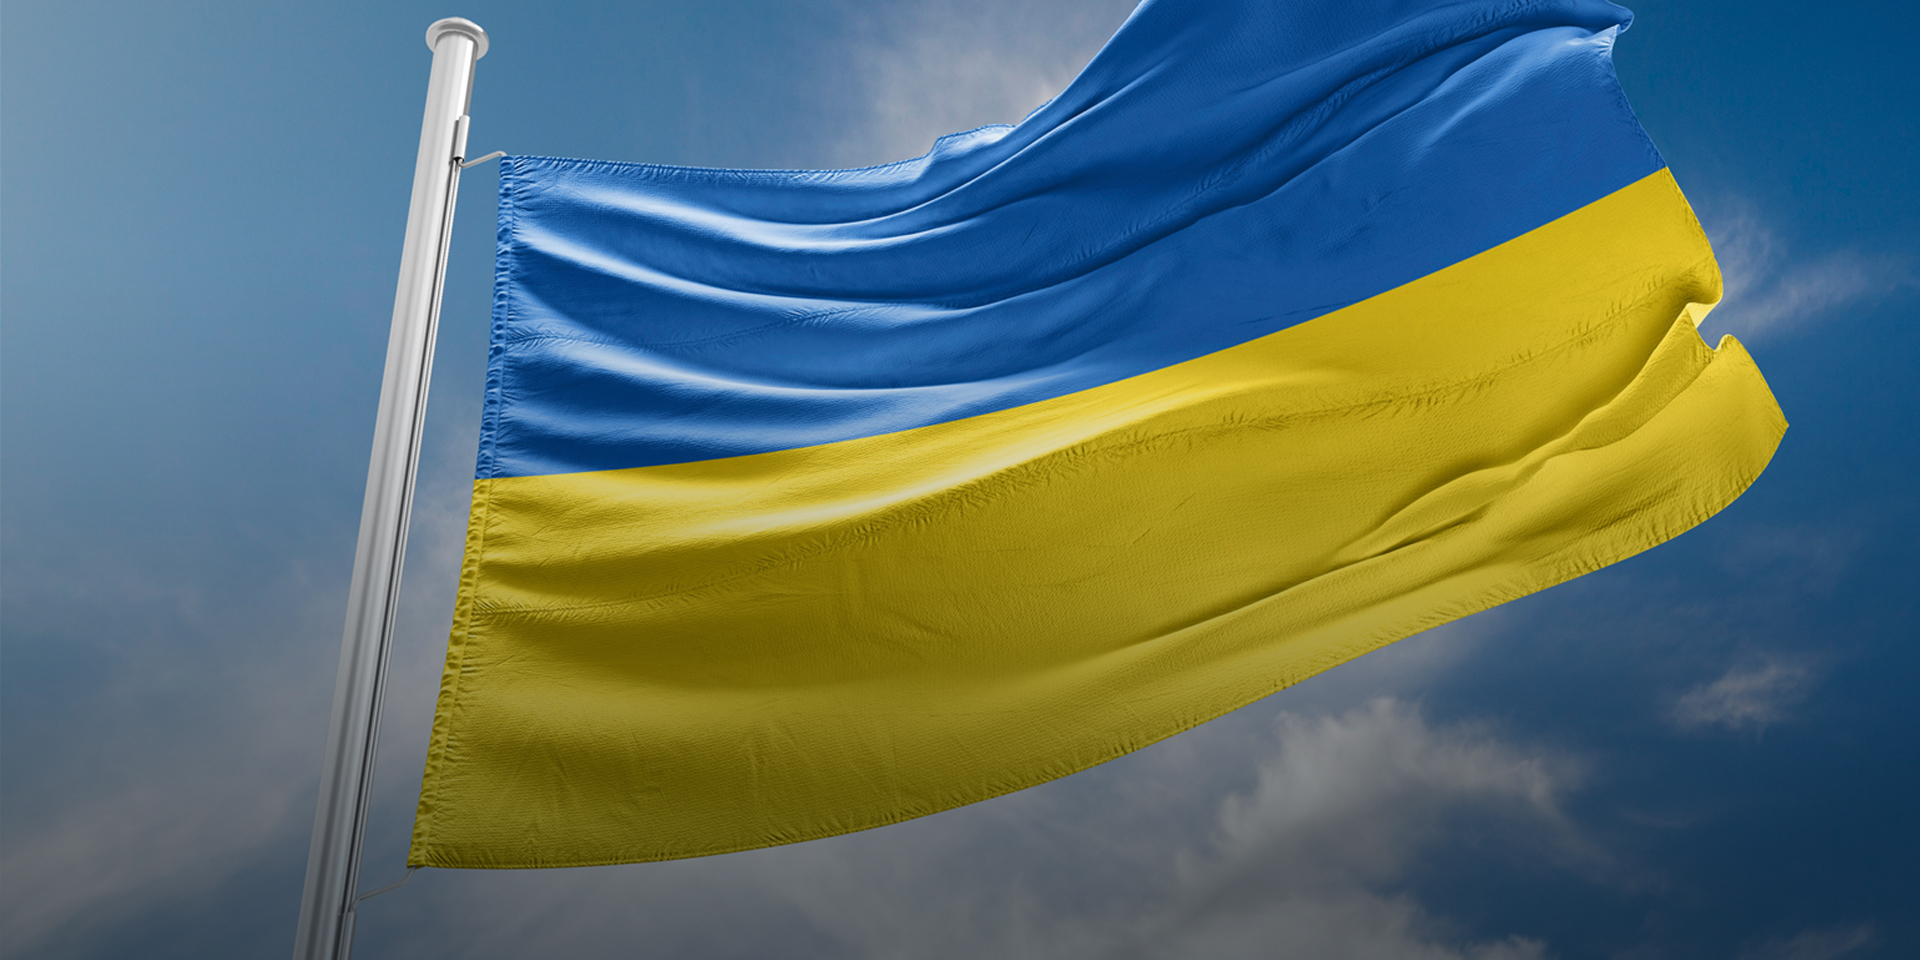 Consumers call on brands to take a stand for Ukraine